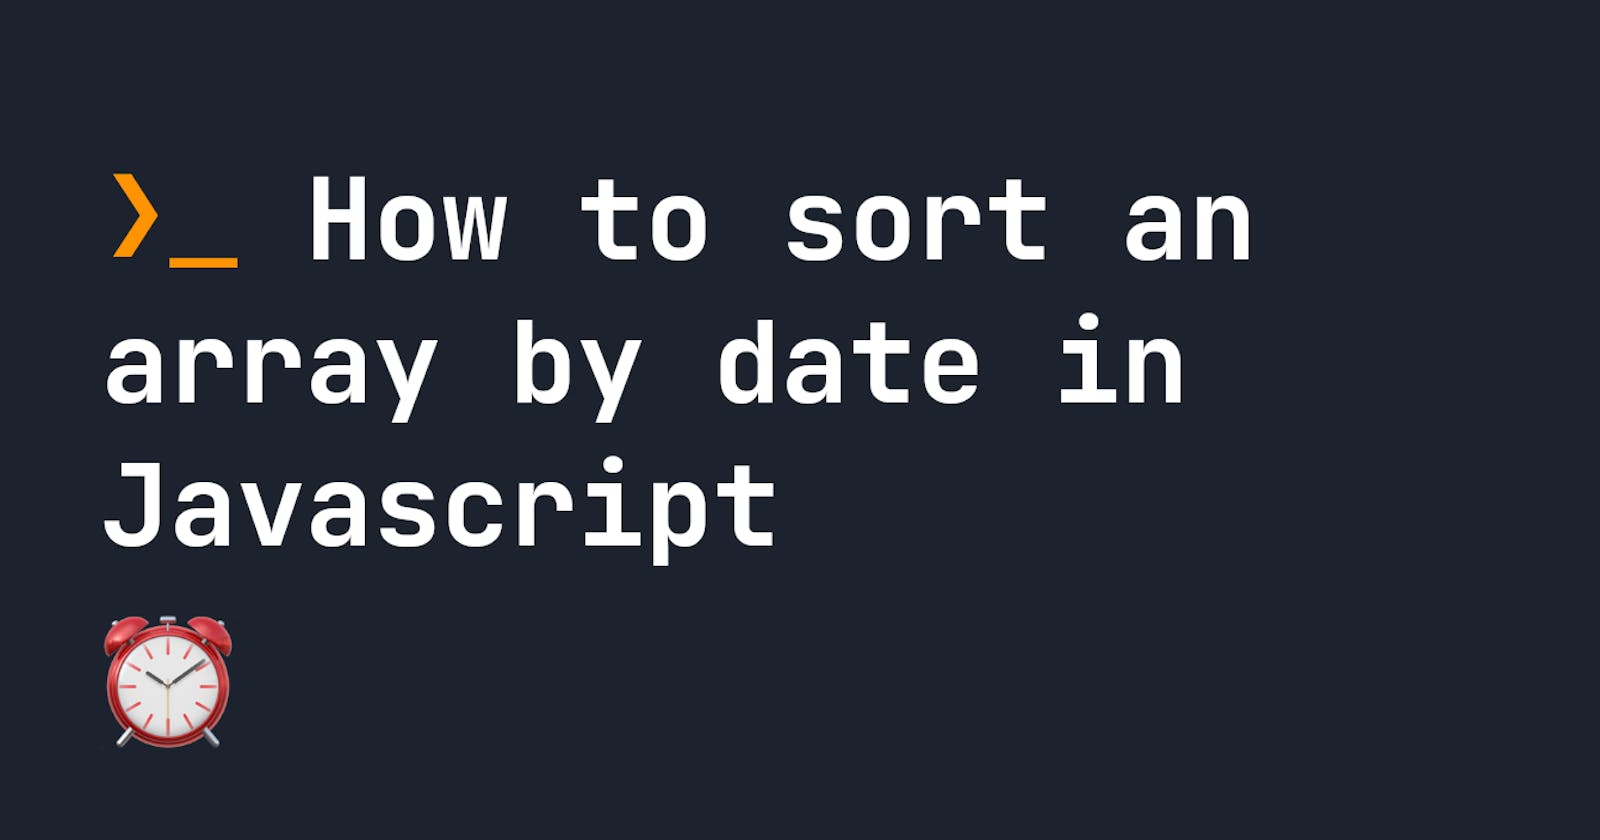 How to sort an array by date in Javascript